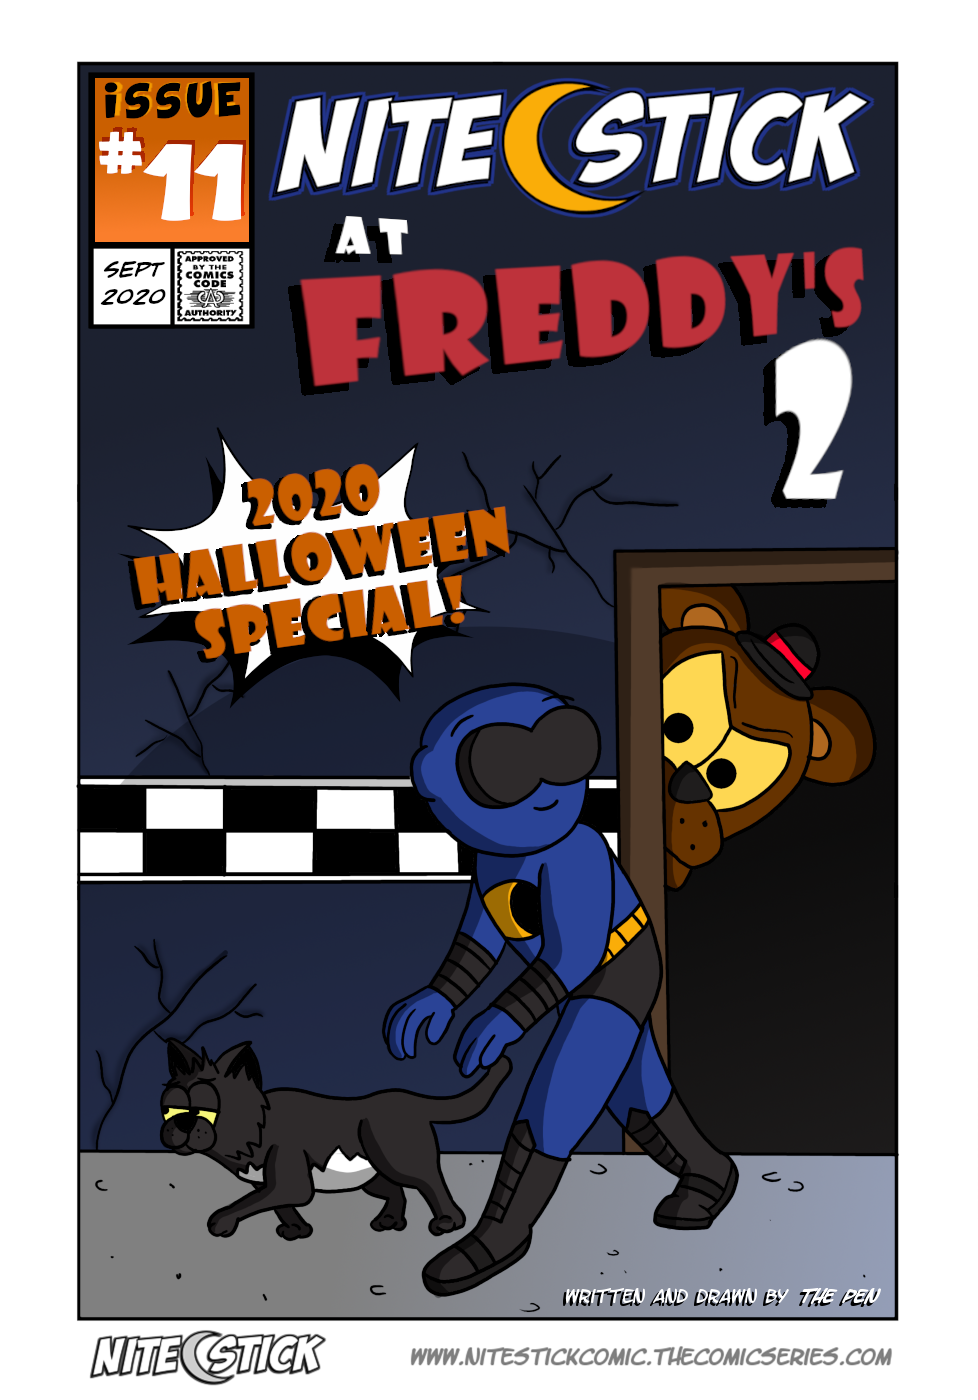 Issue 11: Nite Stick At Freddy's 2